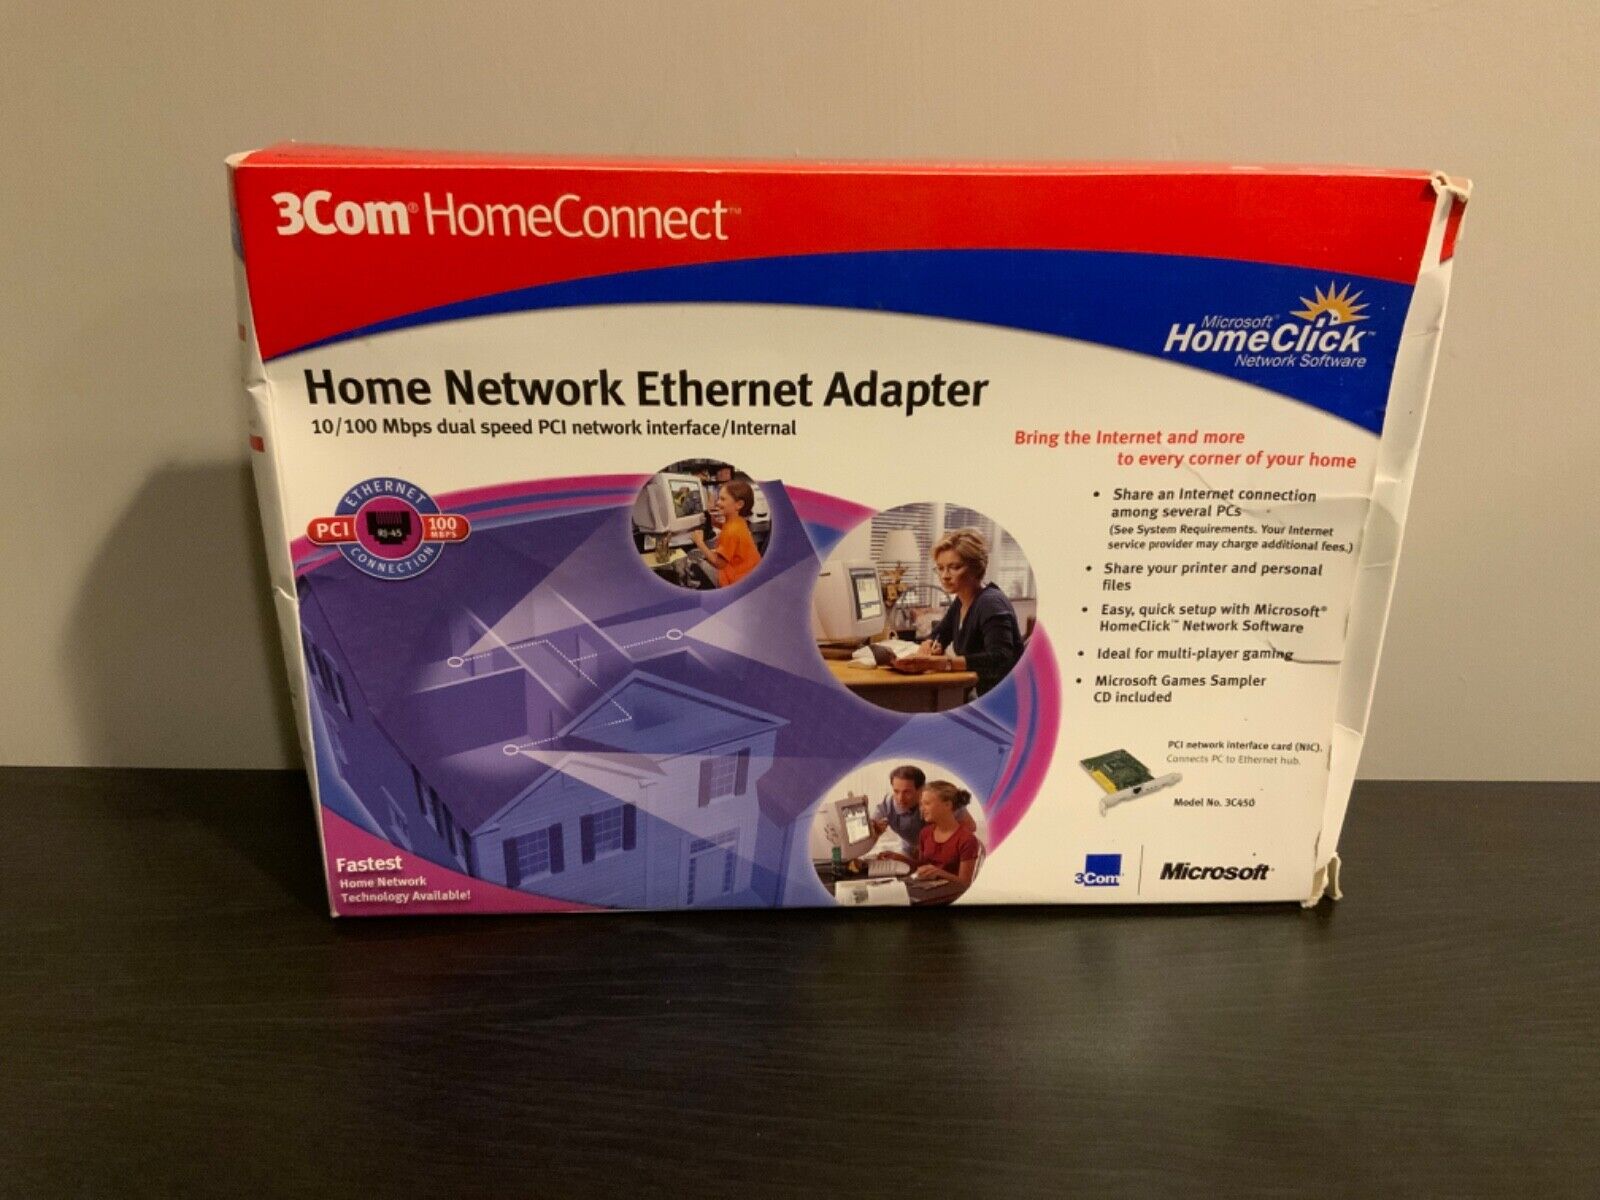 3Com HomeConnect Home Network Ethernet Adapter 10/100 Mbps Dual Speed PCI - NIB